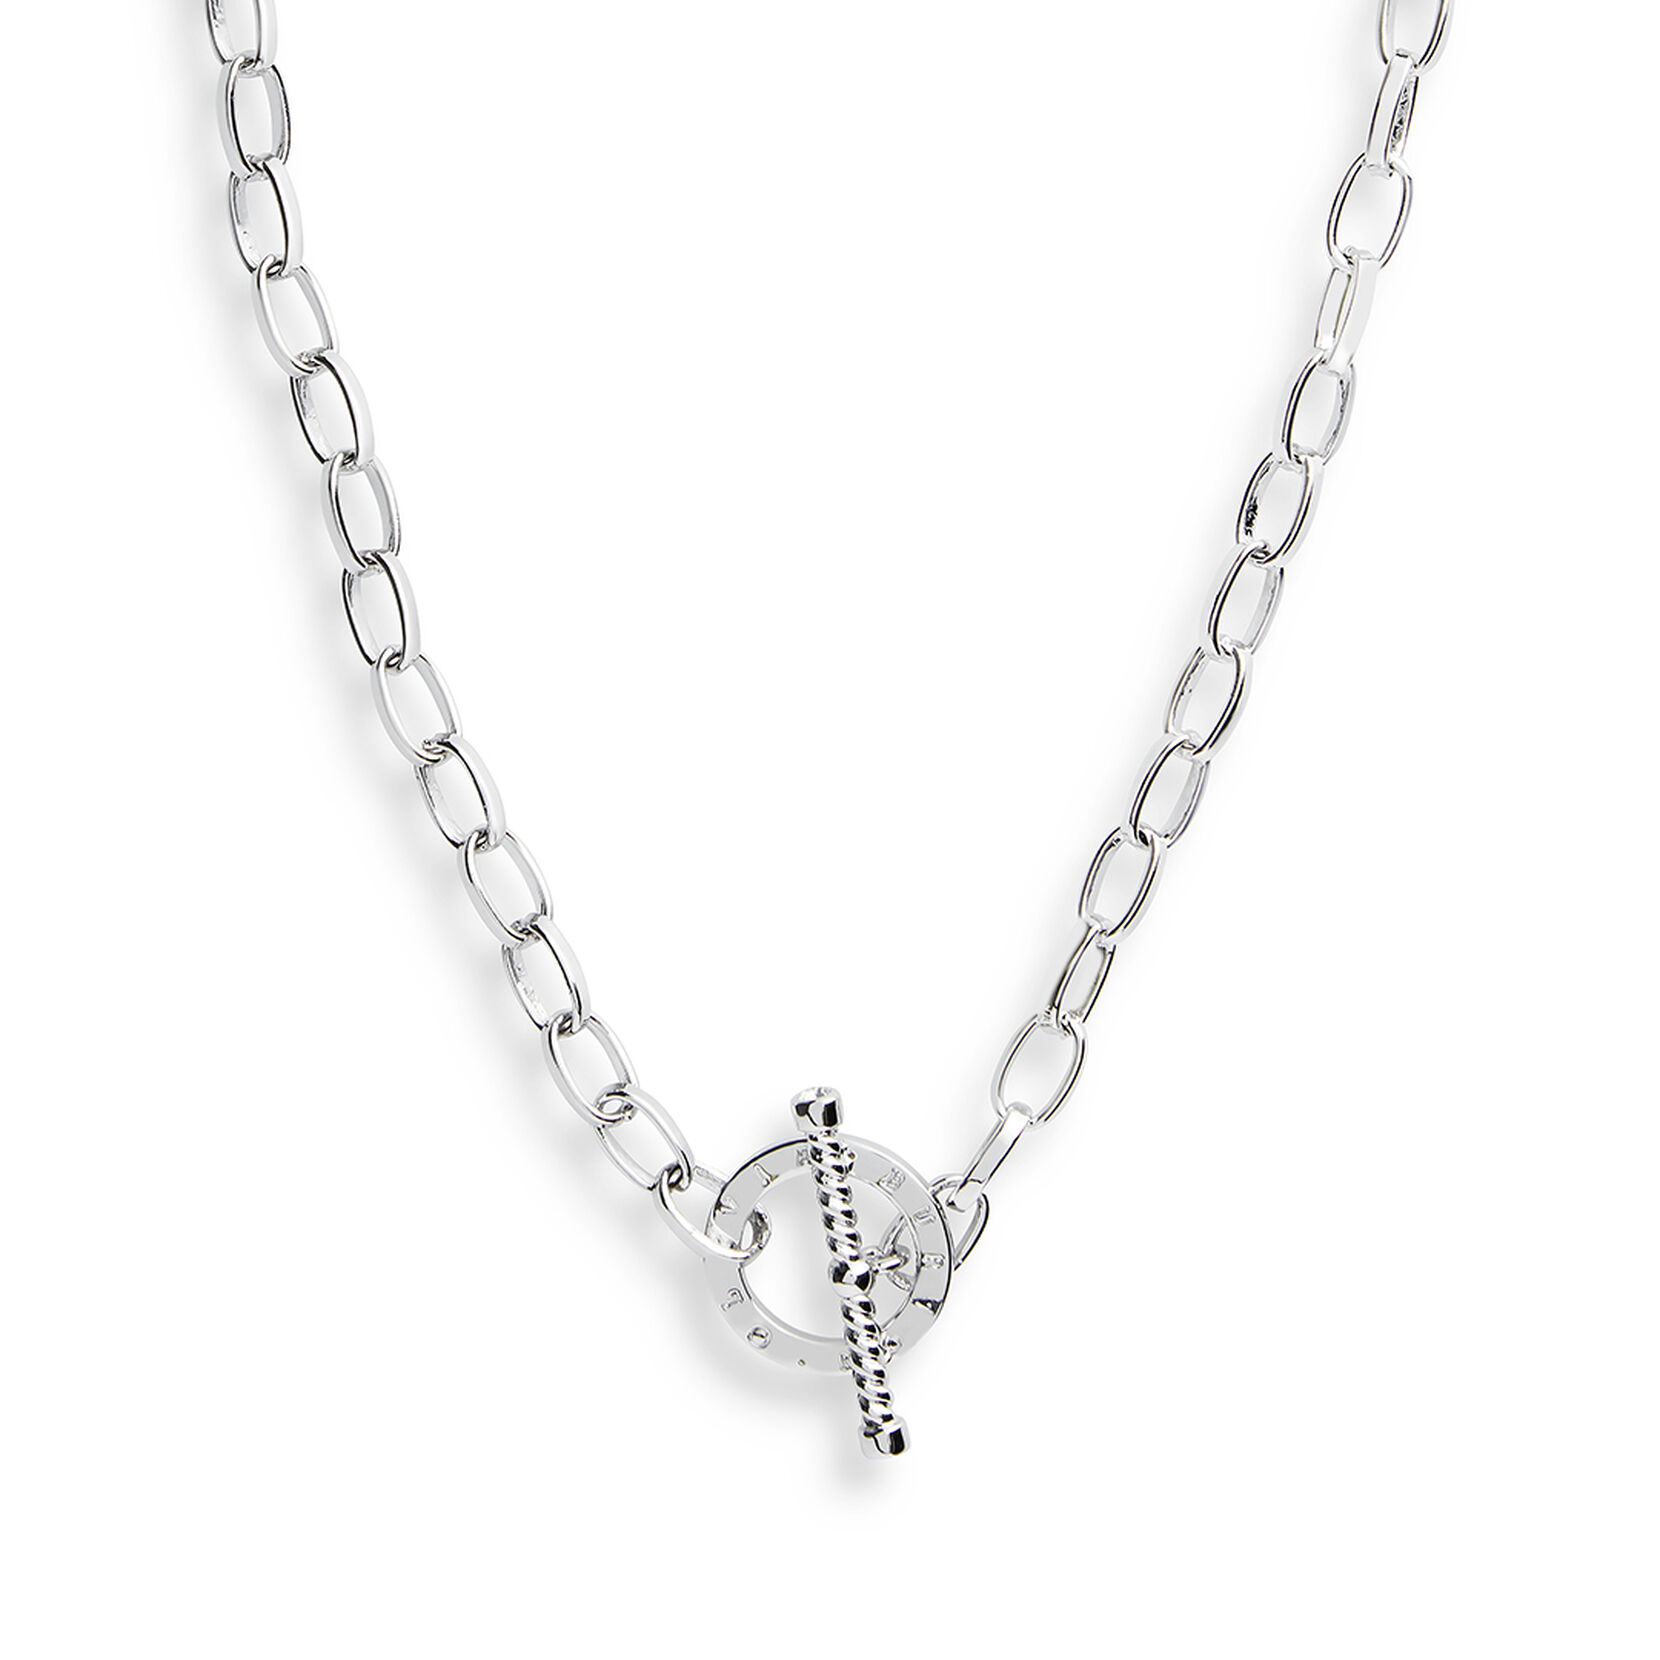 Bejeweled Classics Silver Tbar Necklace